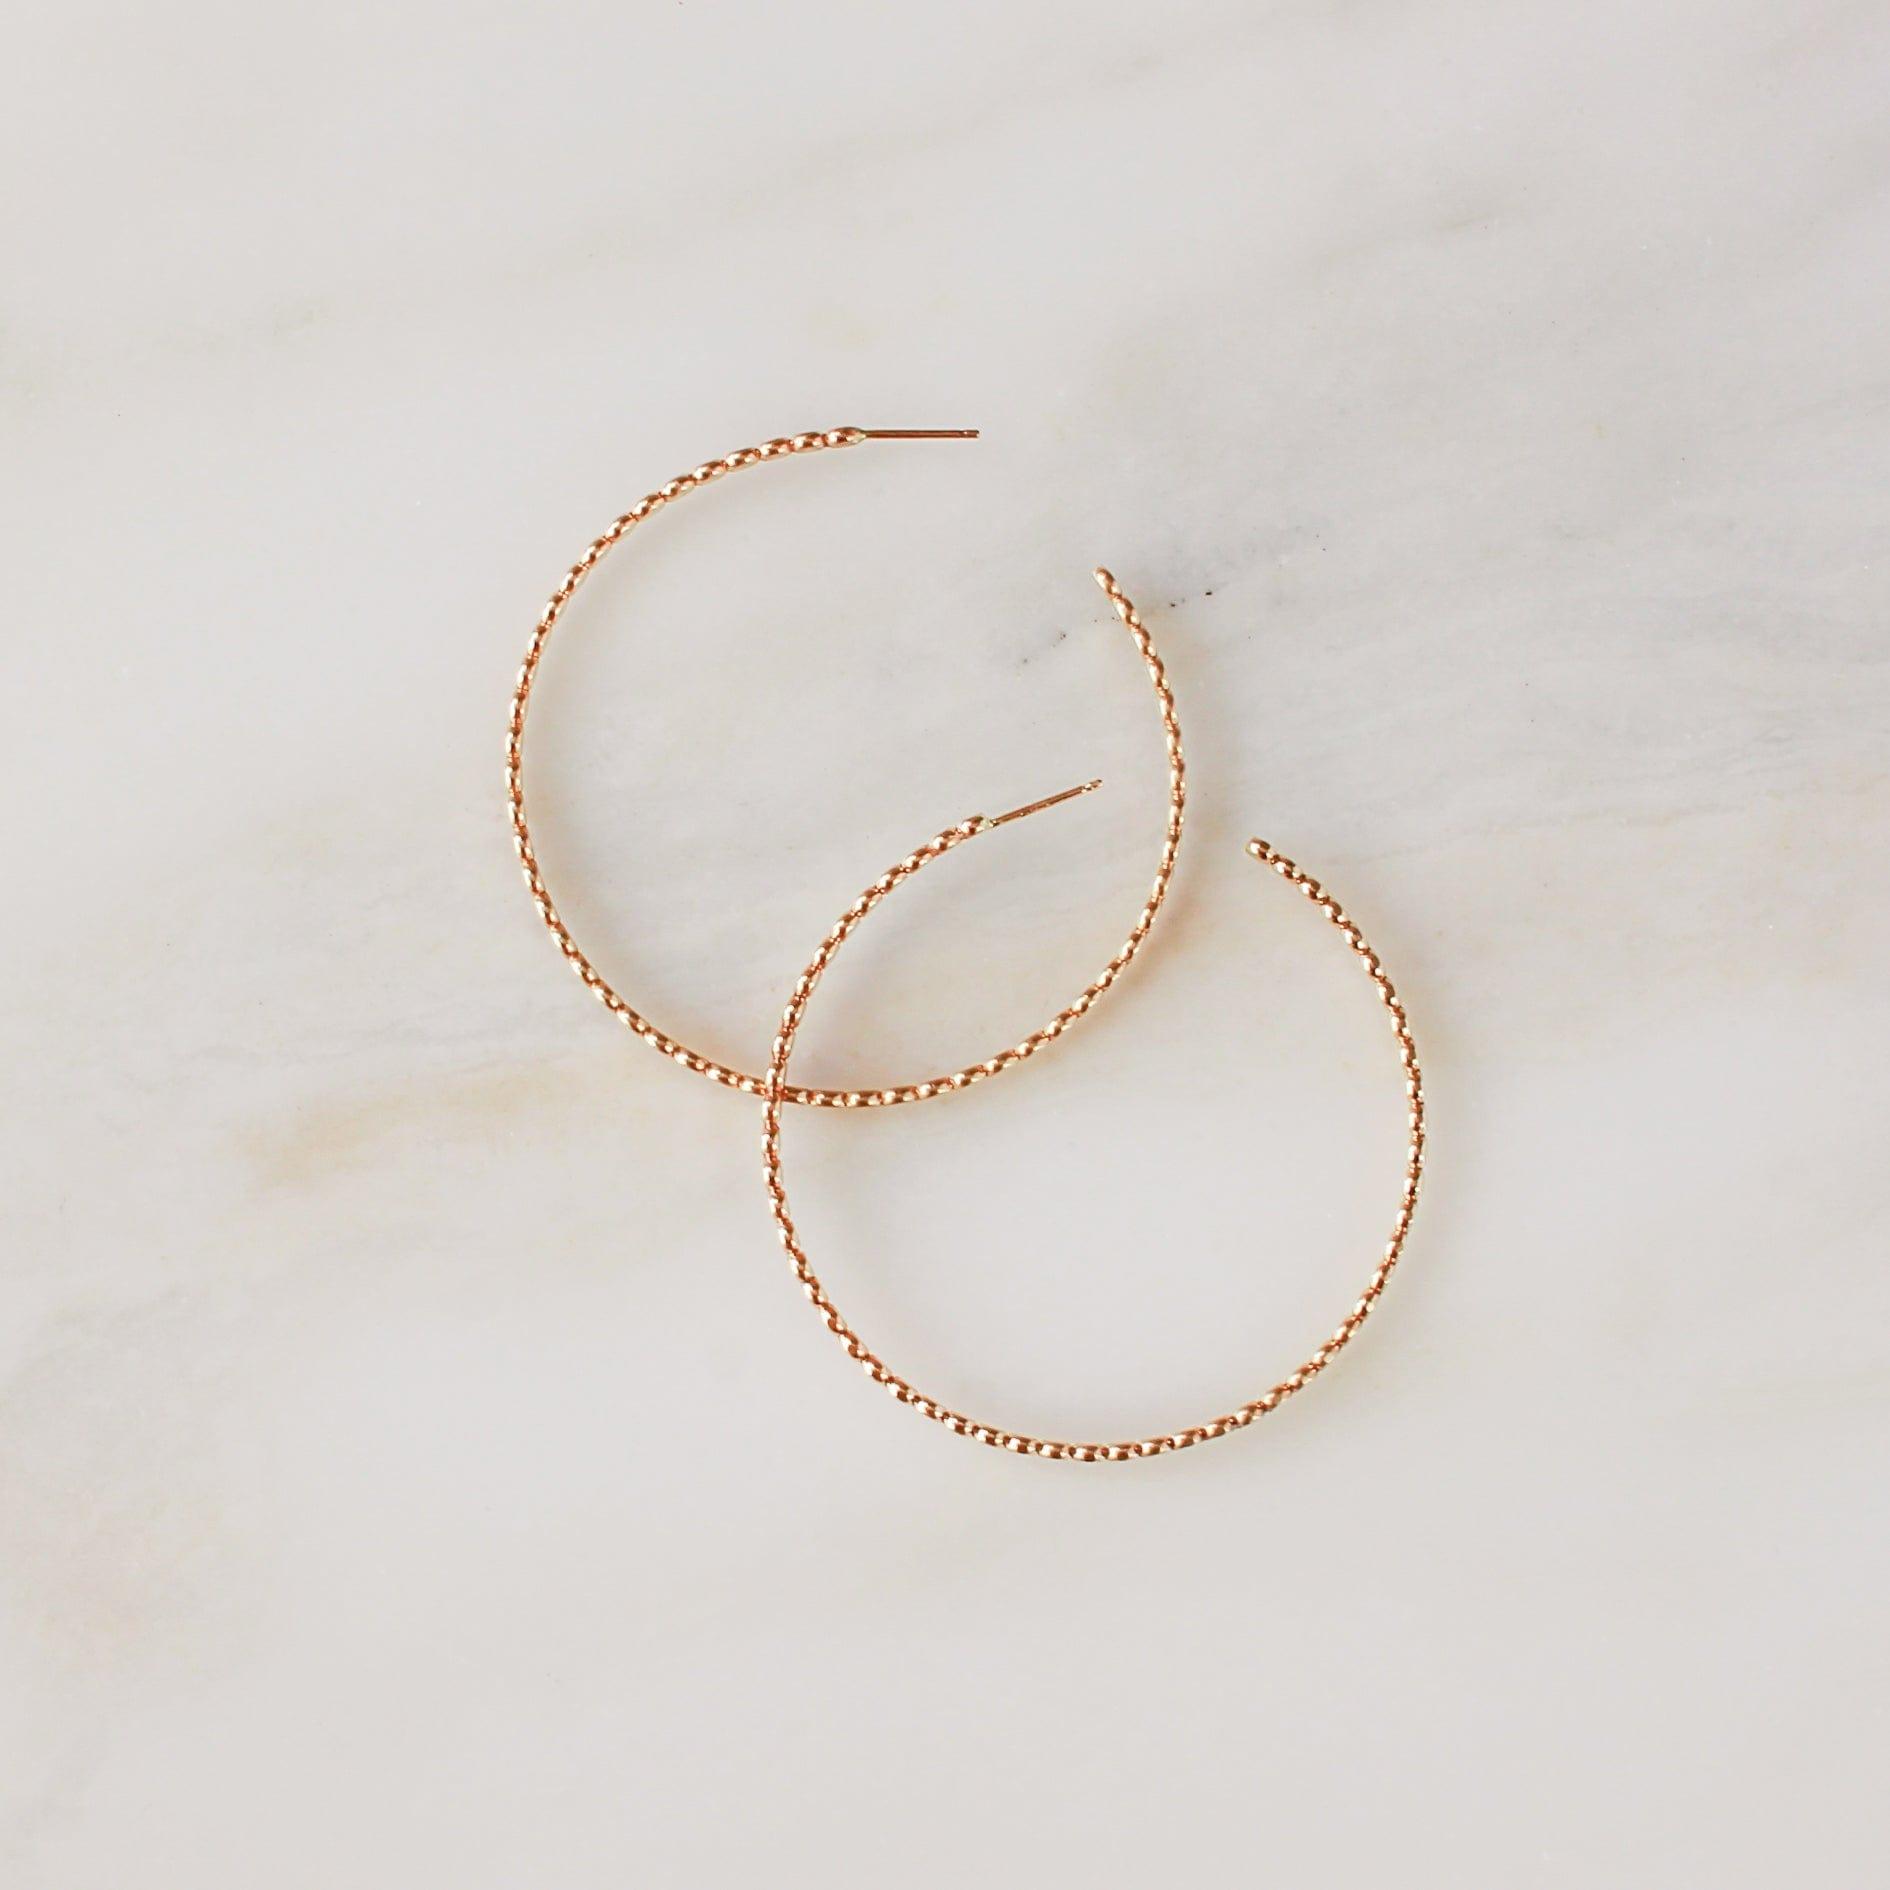 Large Cora Hoop Earrings - Nolia Jewelry - Meaningful + Sustainably Handcrafted Jewelry